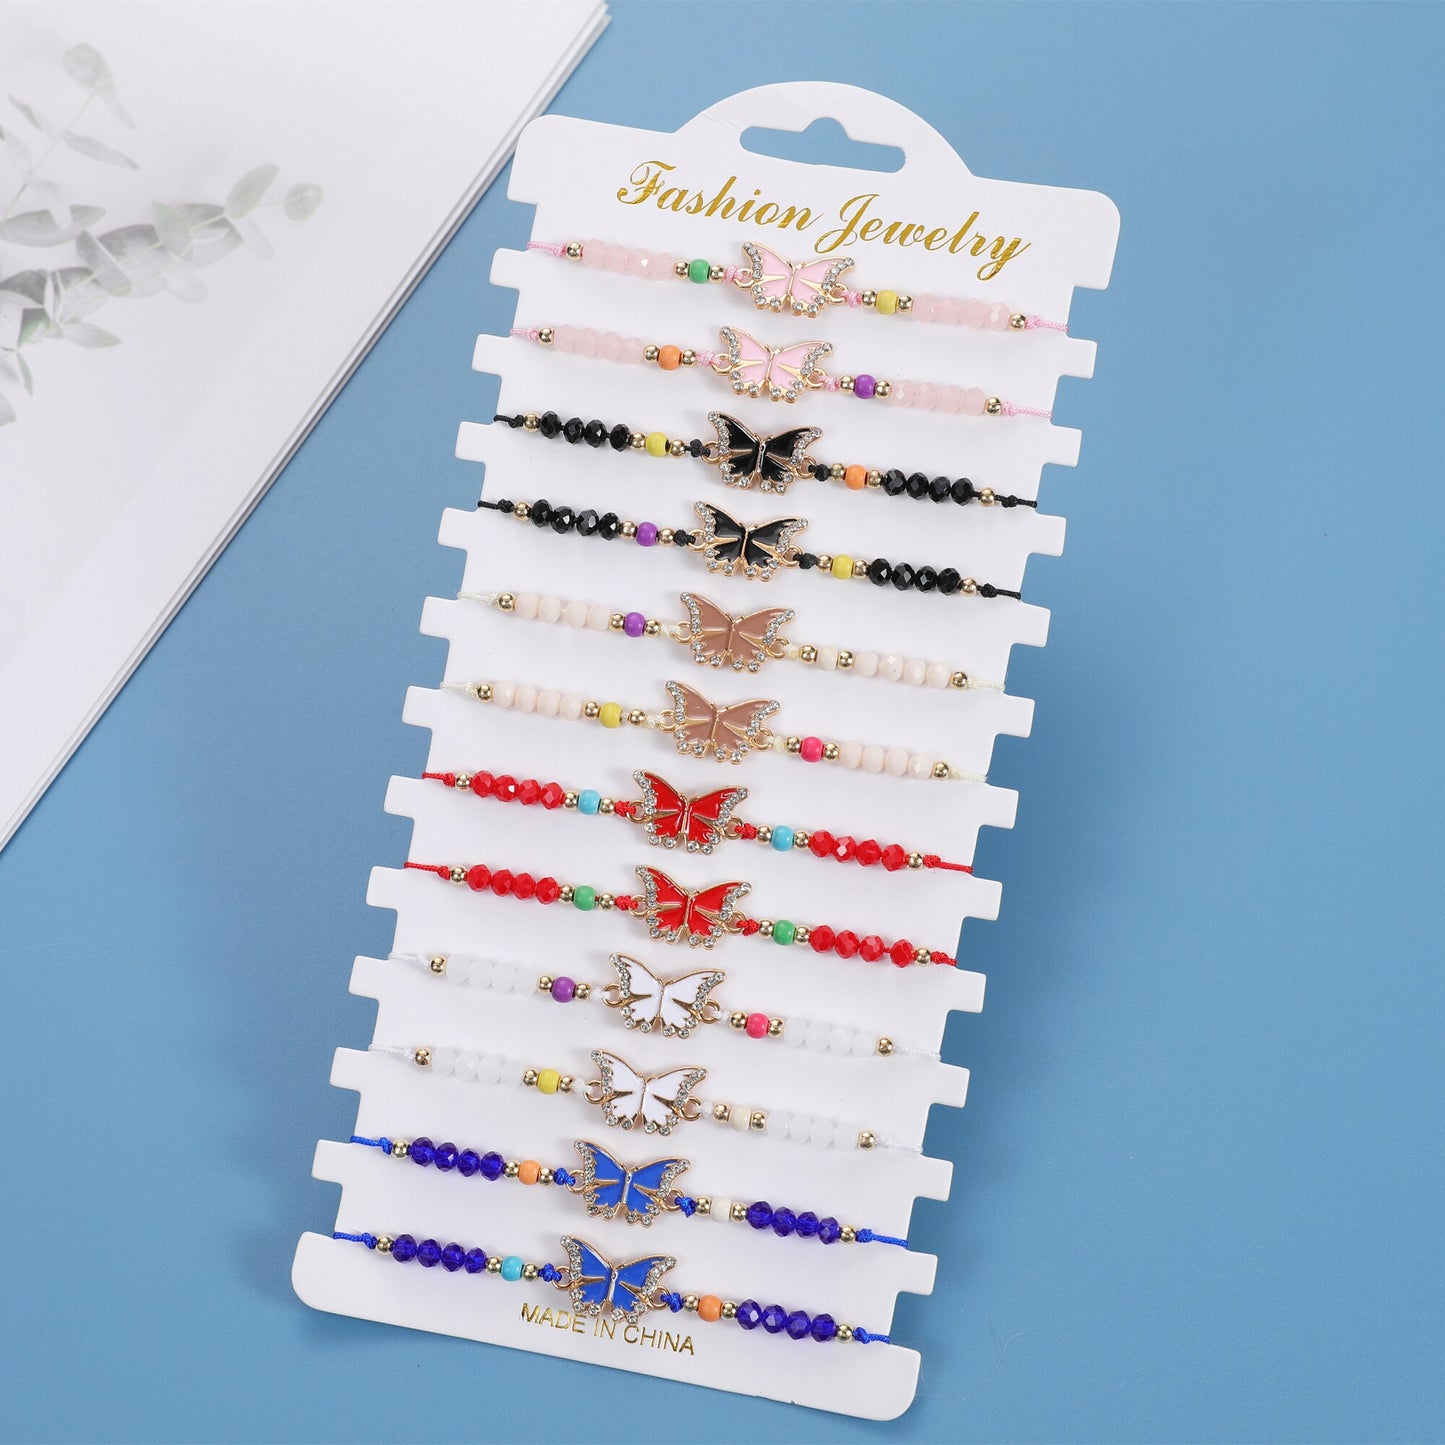 12pcs/lot Fashion Colorful Crystal Beads Butterfly Pendant Braided Bracelet Set Women Girls Adjustable Rope Yoga Anklet Jewelry